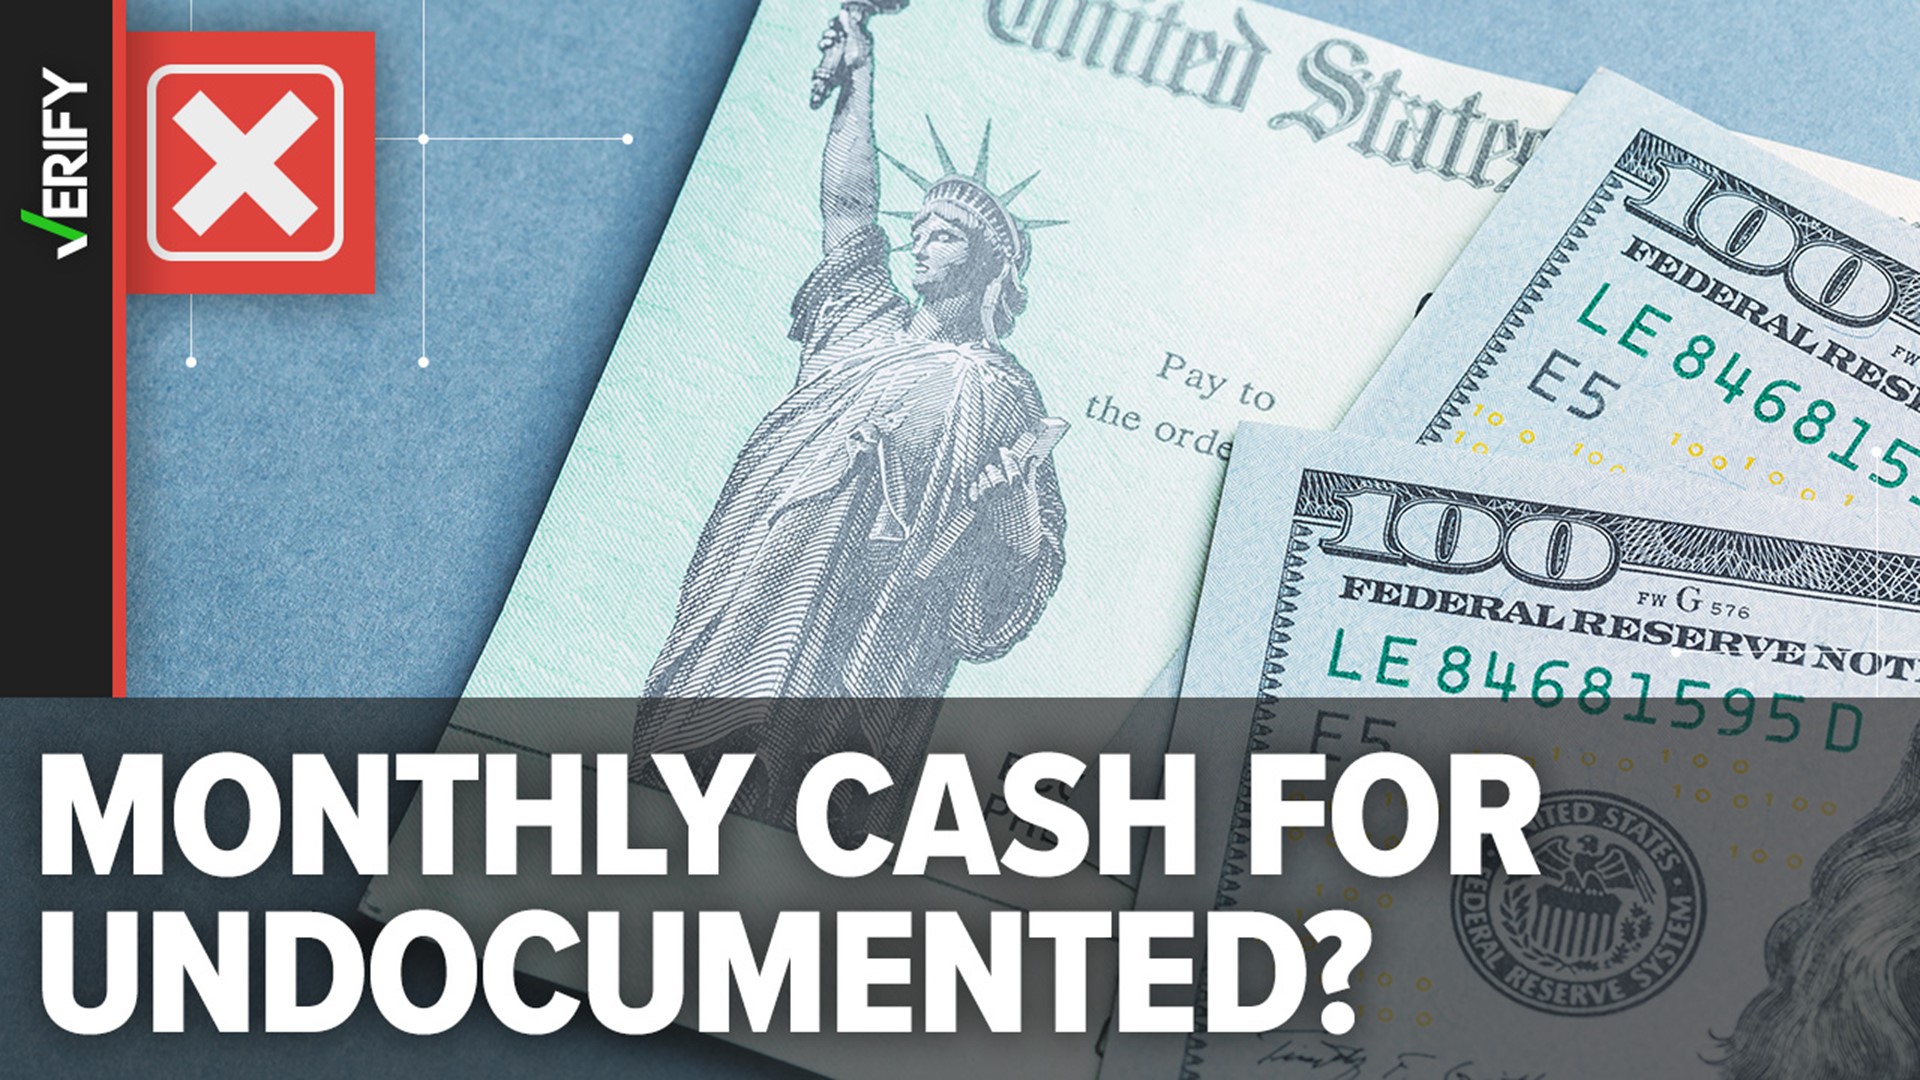 Multiple VERIFY readers asked us about claims that undocumented immigrants get a monthly stipend from the government. Here’s what we found.